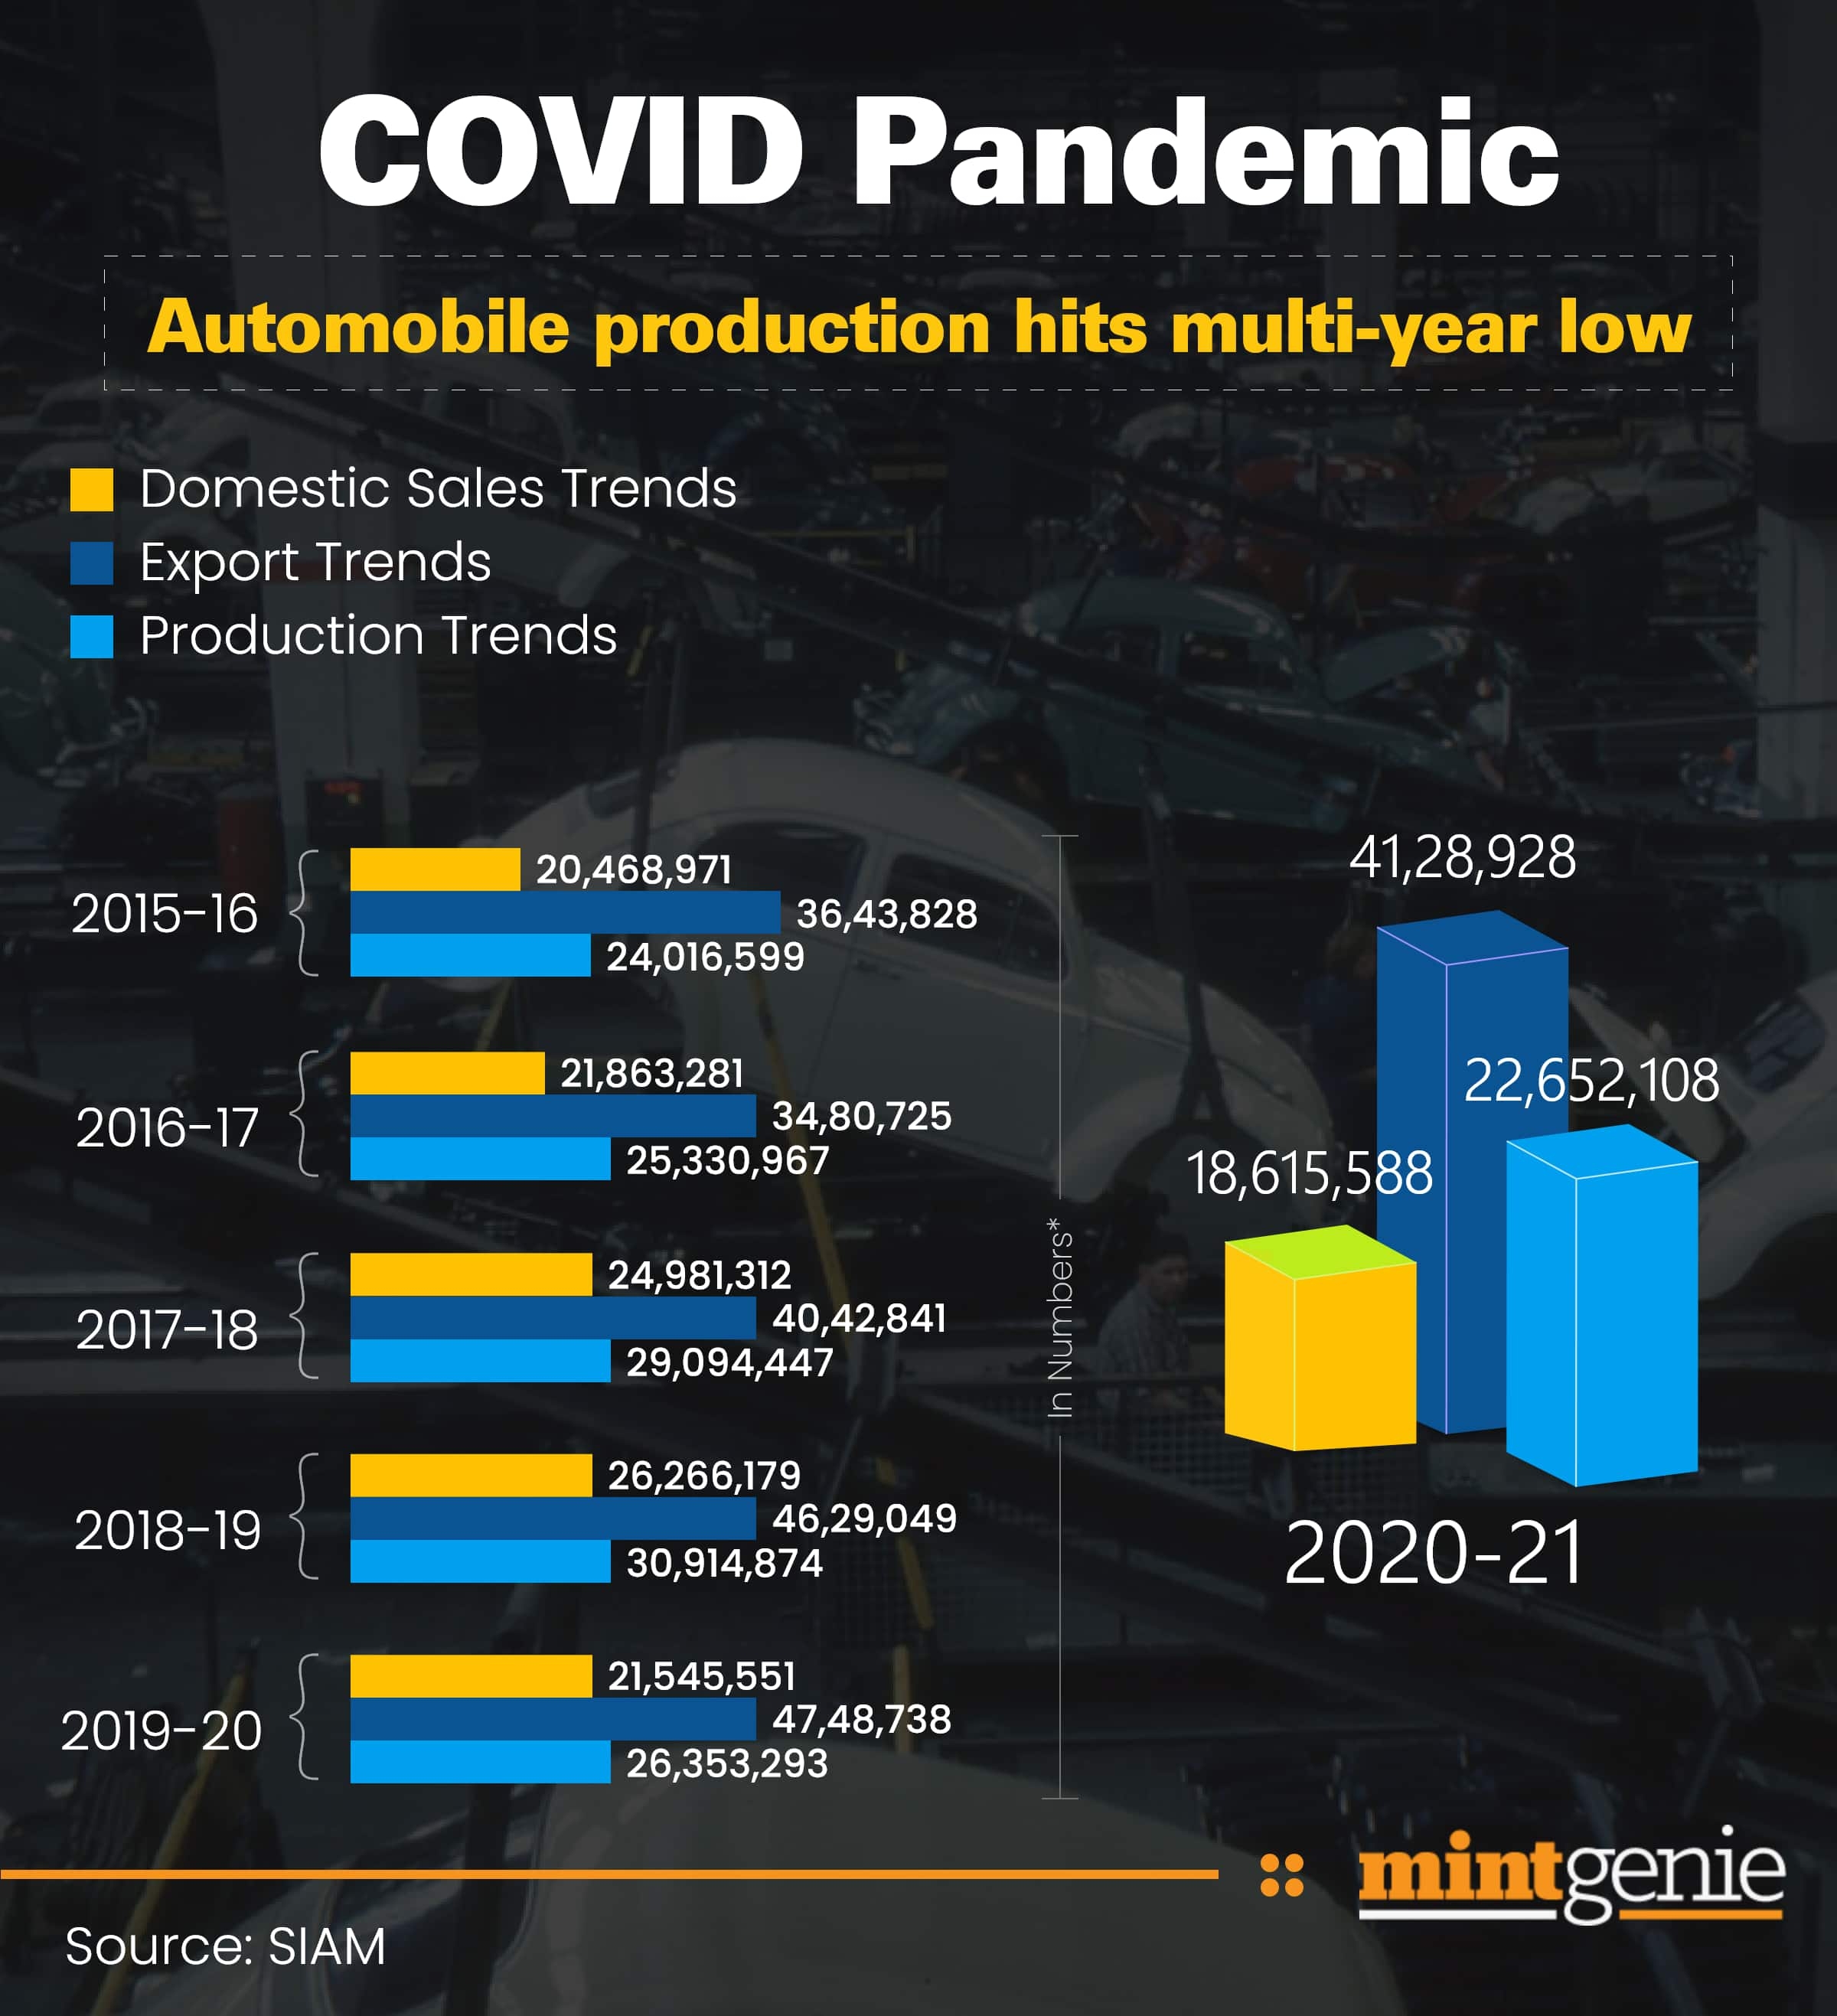 COVID Pandemic: Automobile production hits multi-year low as pandemic